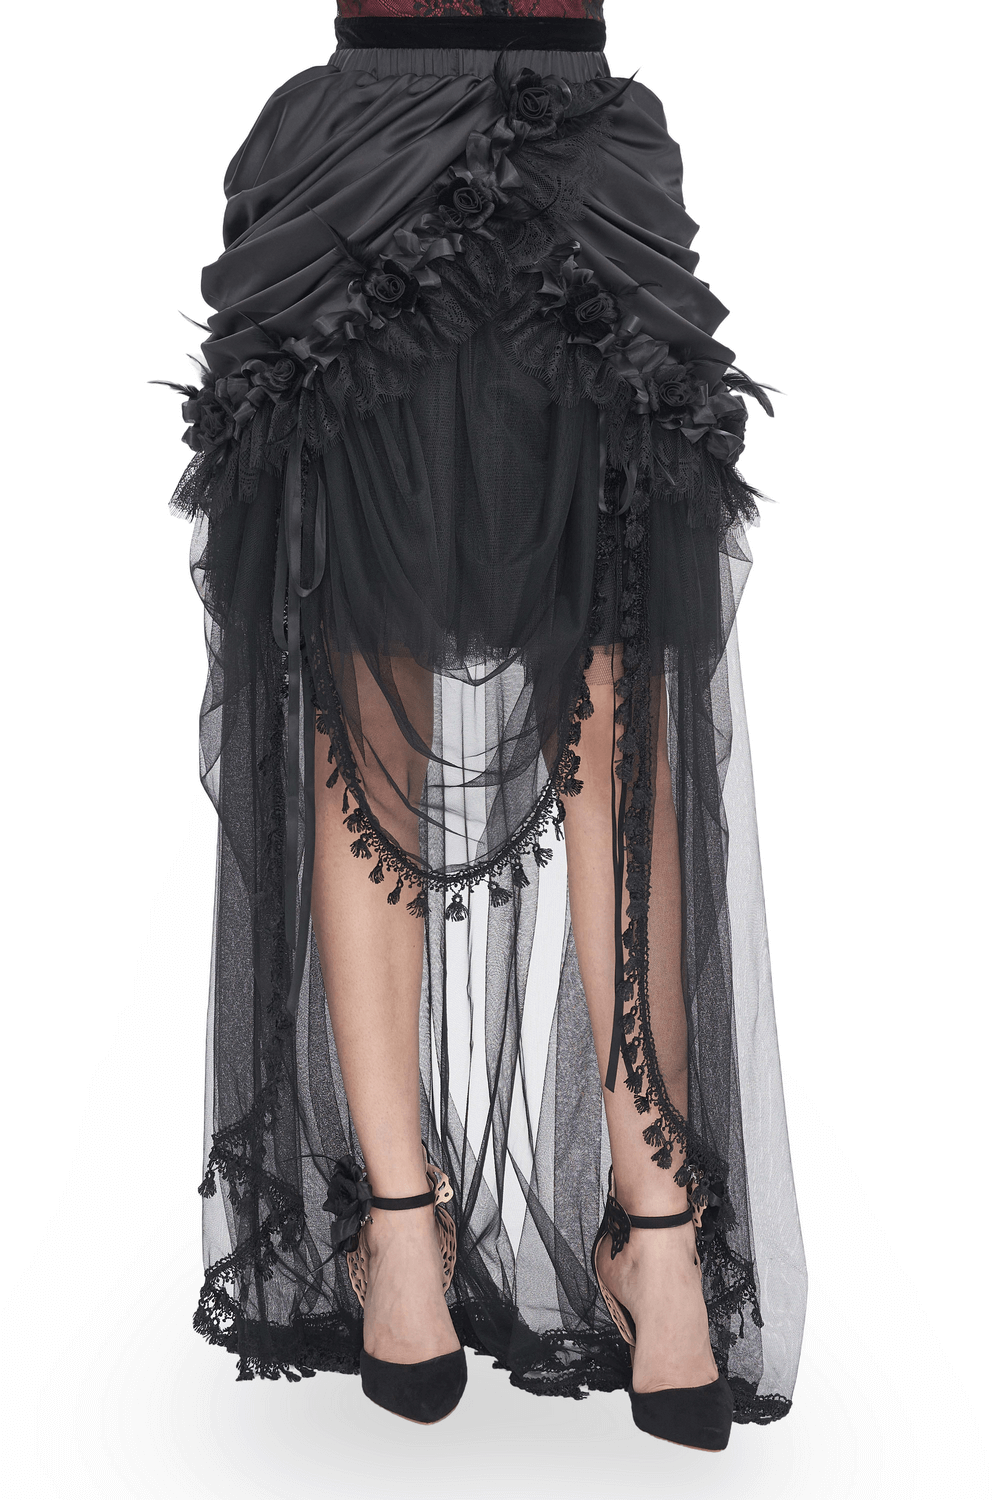 Gothic Black Lace Maxi Skirt with Satin Lining